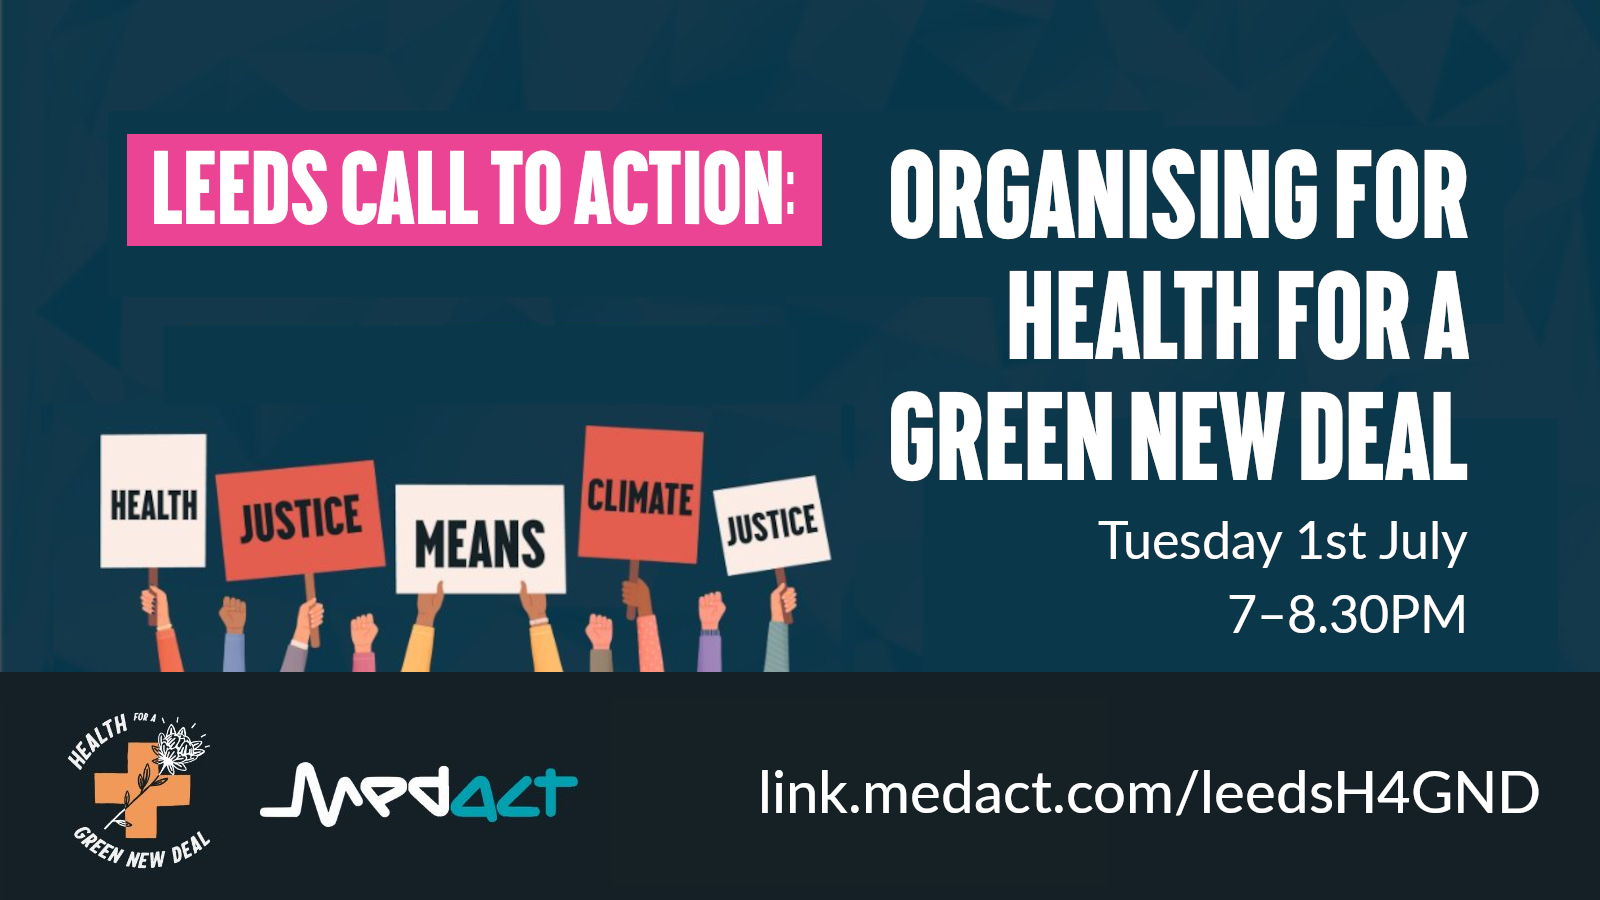 Leeds call to action: organising for Health for a Green New Deal